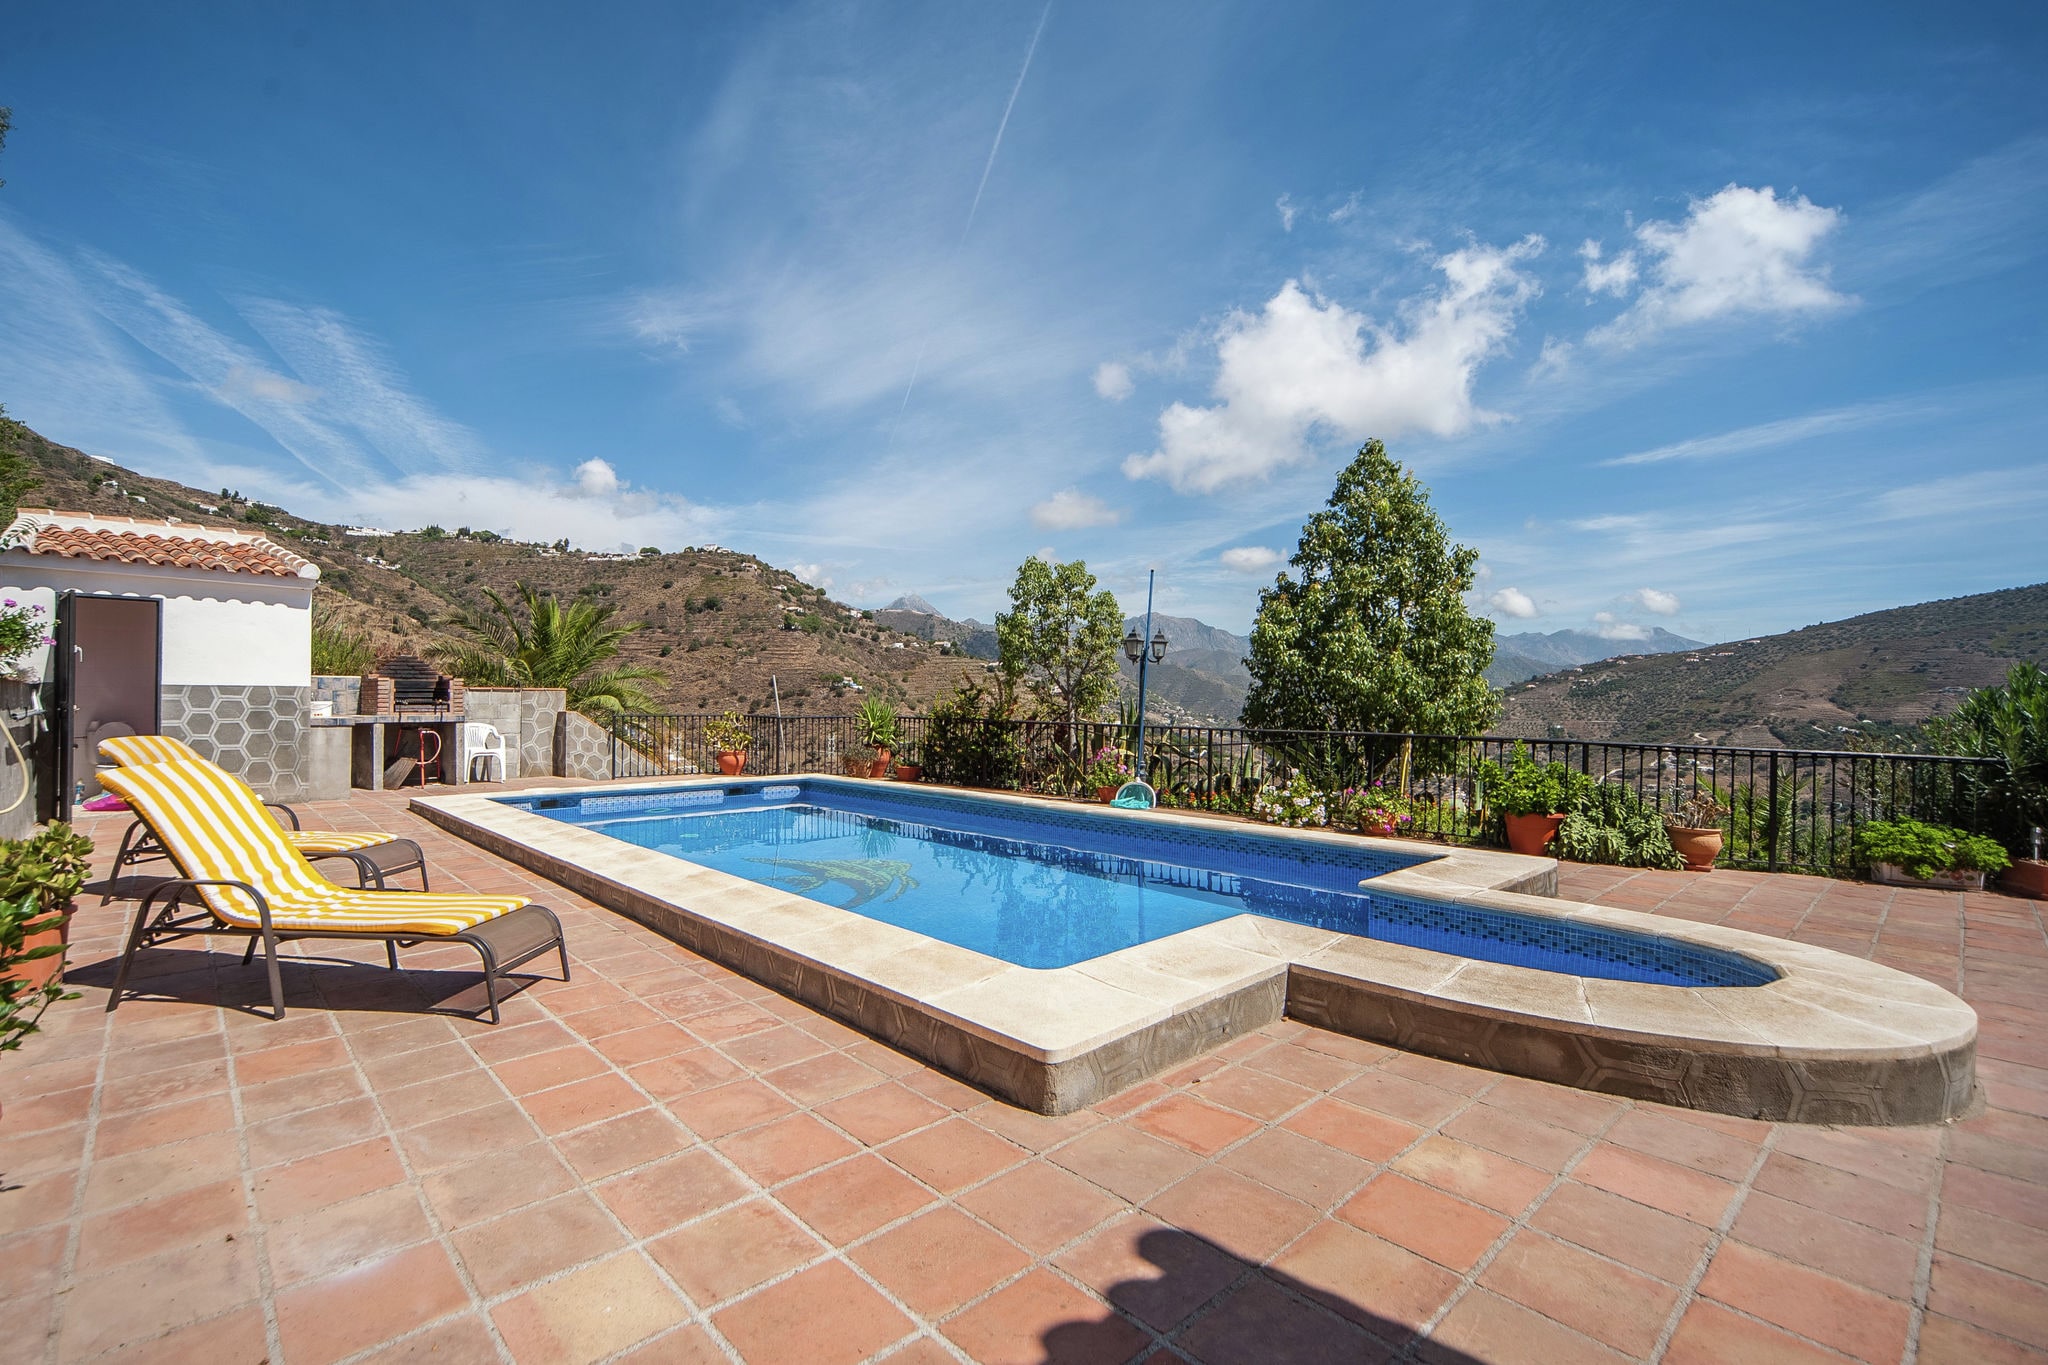 Spacious cottage with private pool and beautiful views of mountains and sea